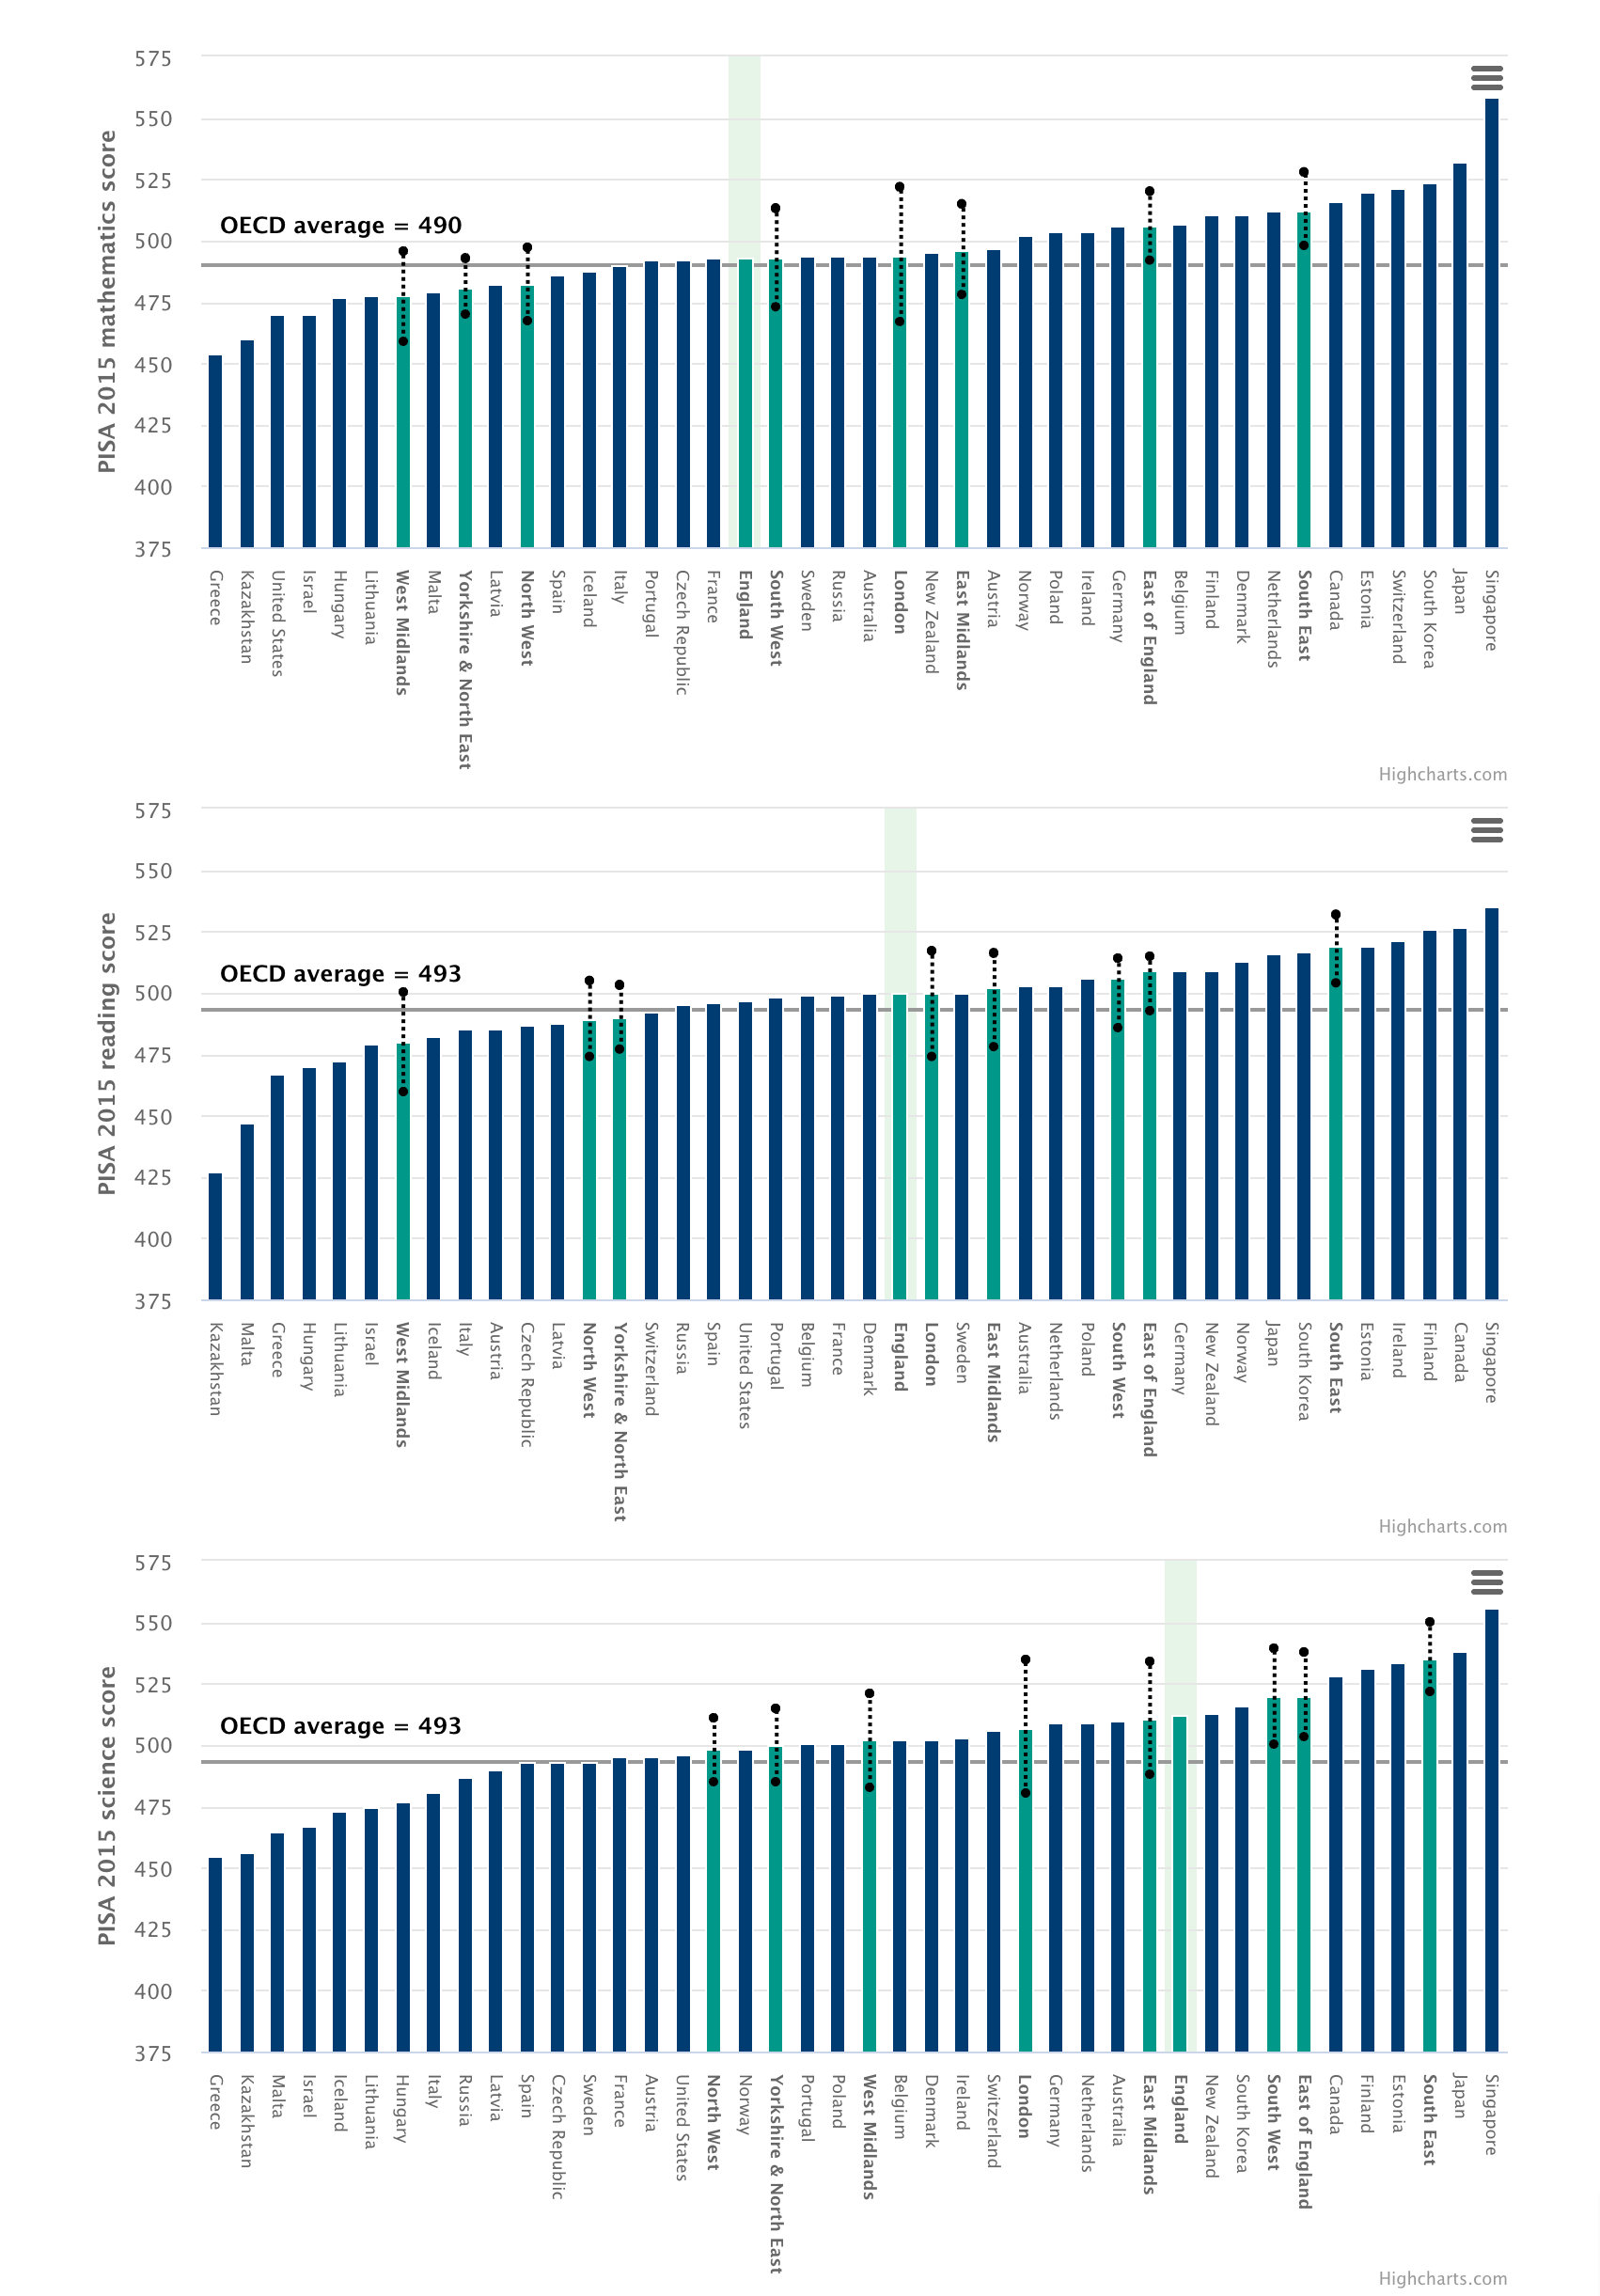 Comparing English regions’ reading, science and maths scores to those of other countries